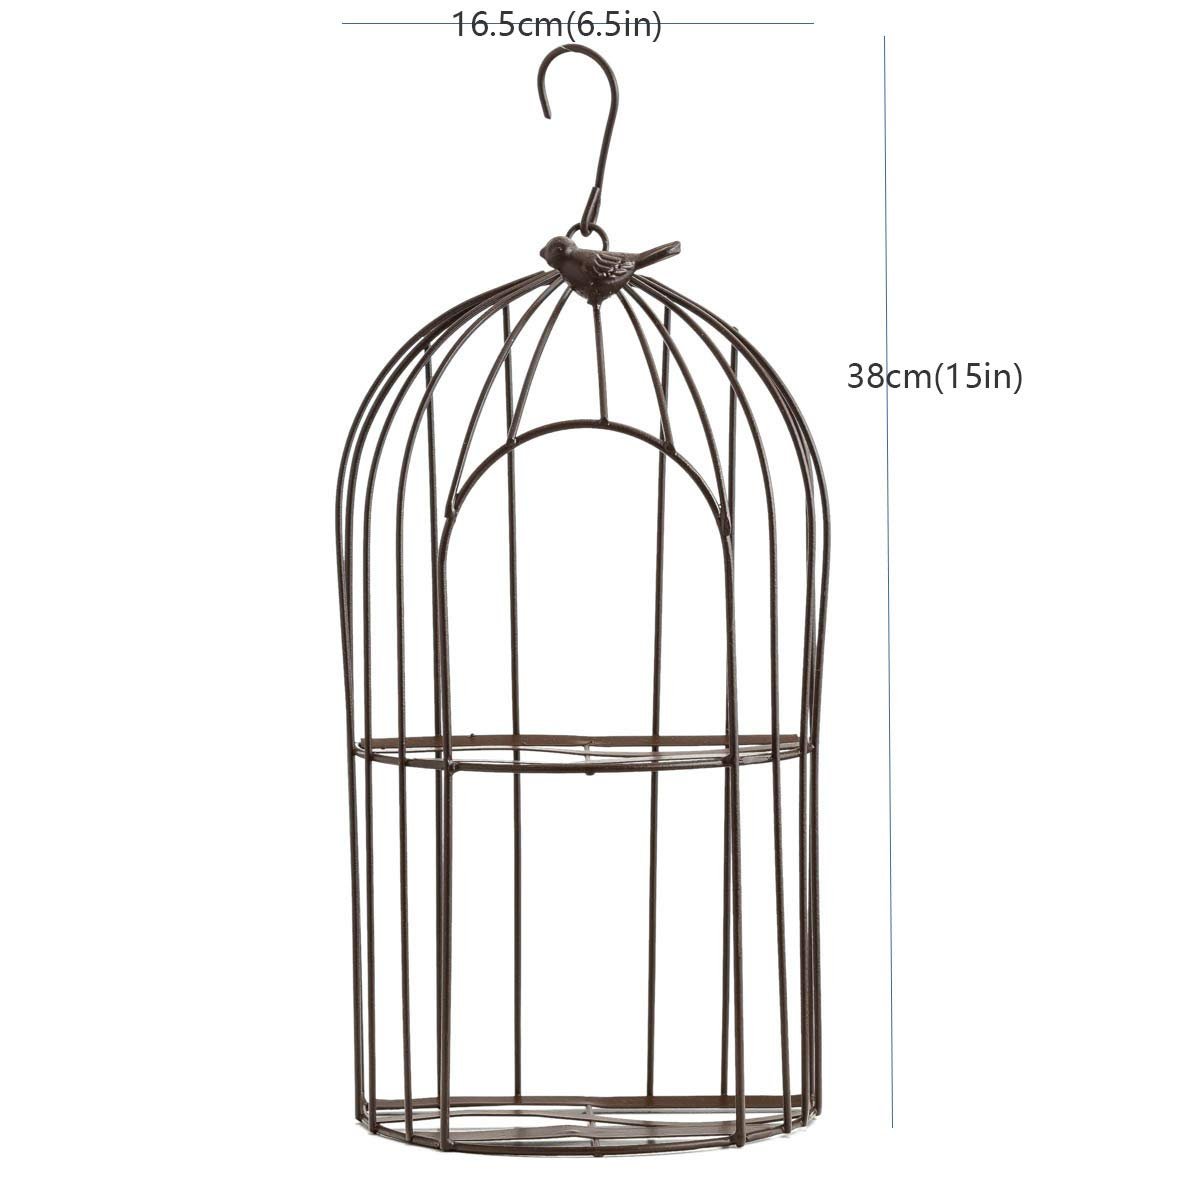 TJ Global 2-Plant Iron Birdcage Hanging Planter, Metal Wire Flower Pot Basket Wrought Iron Plant Stands for Plants, Flowers, Garden, Patio, Balcony Outdoor and Indoor Dcor - image 3 of 6